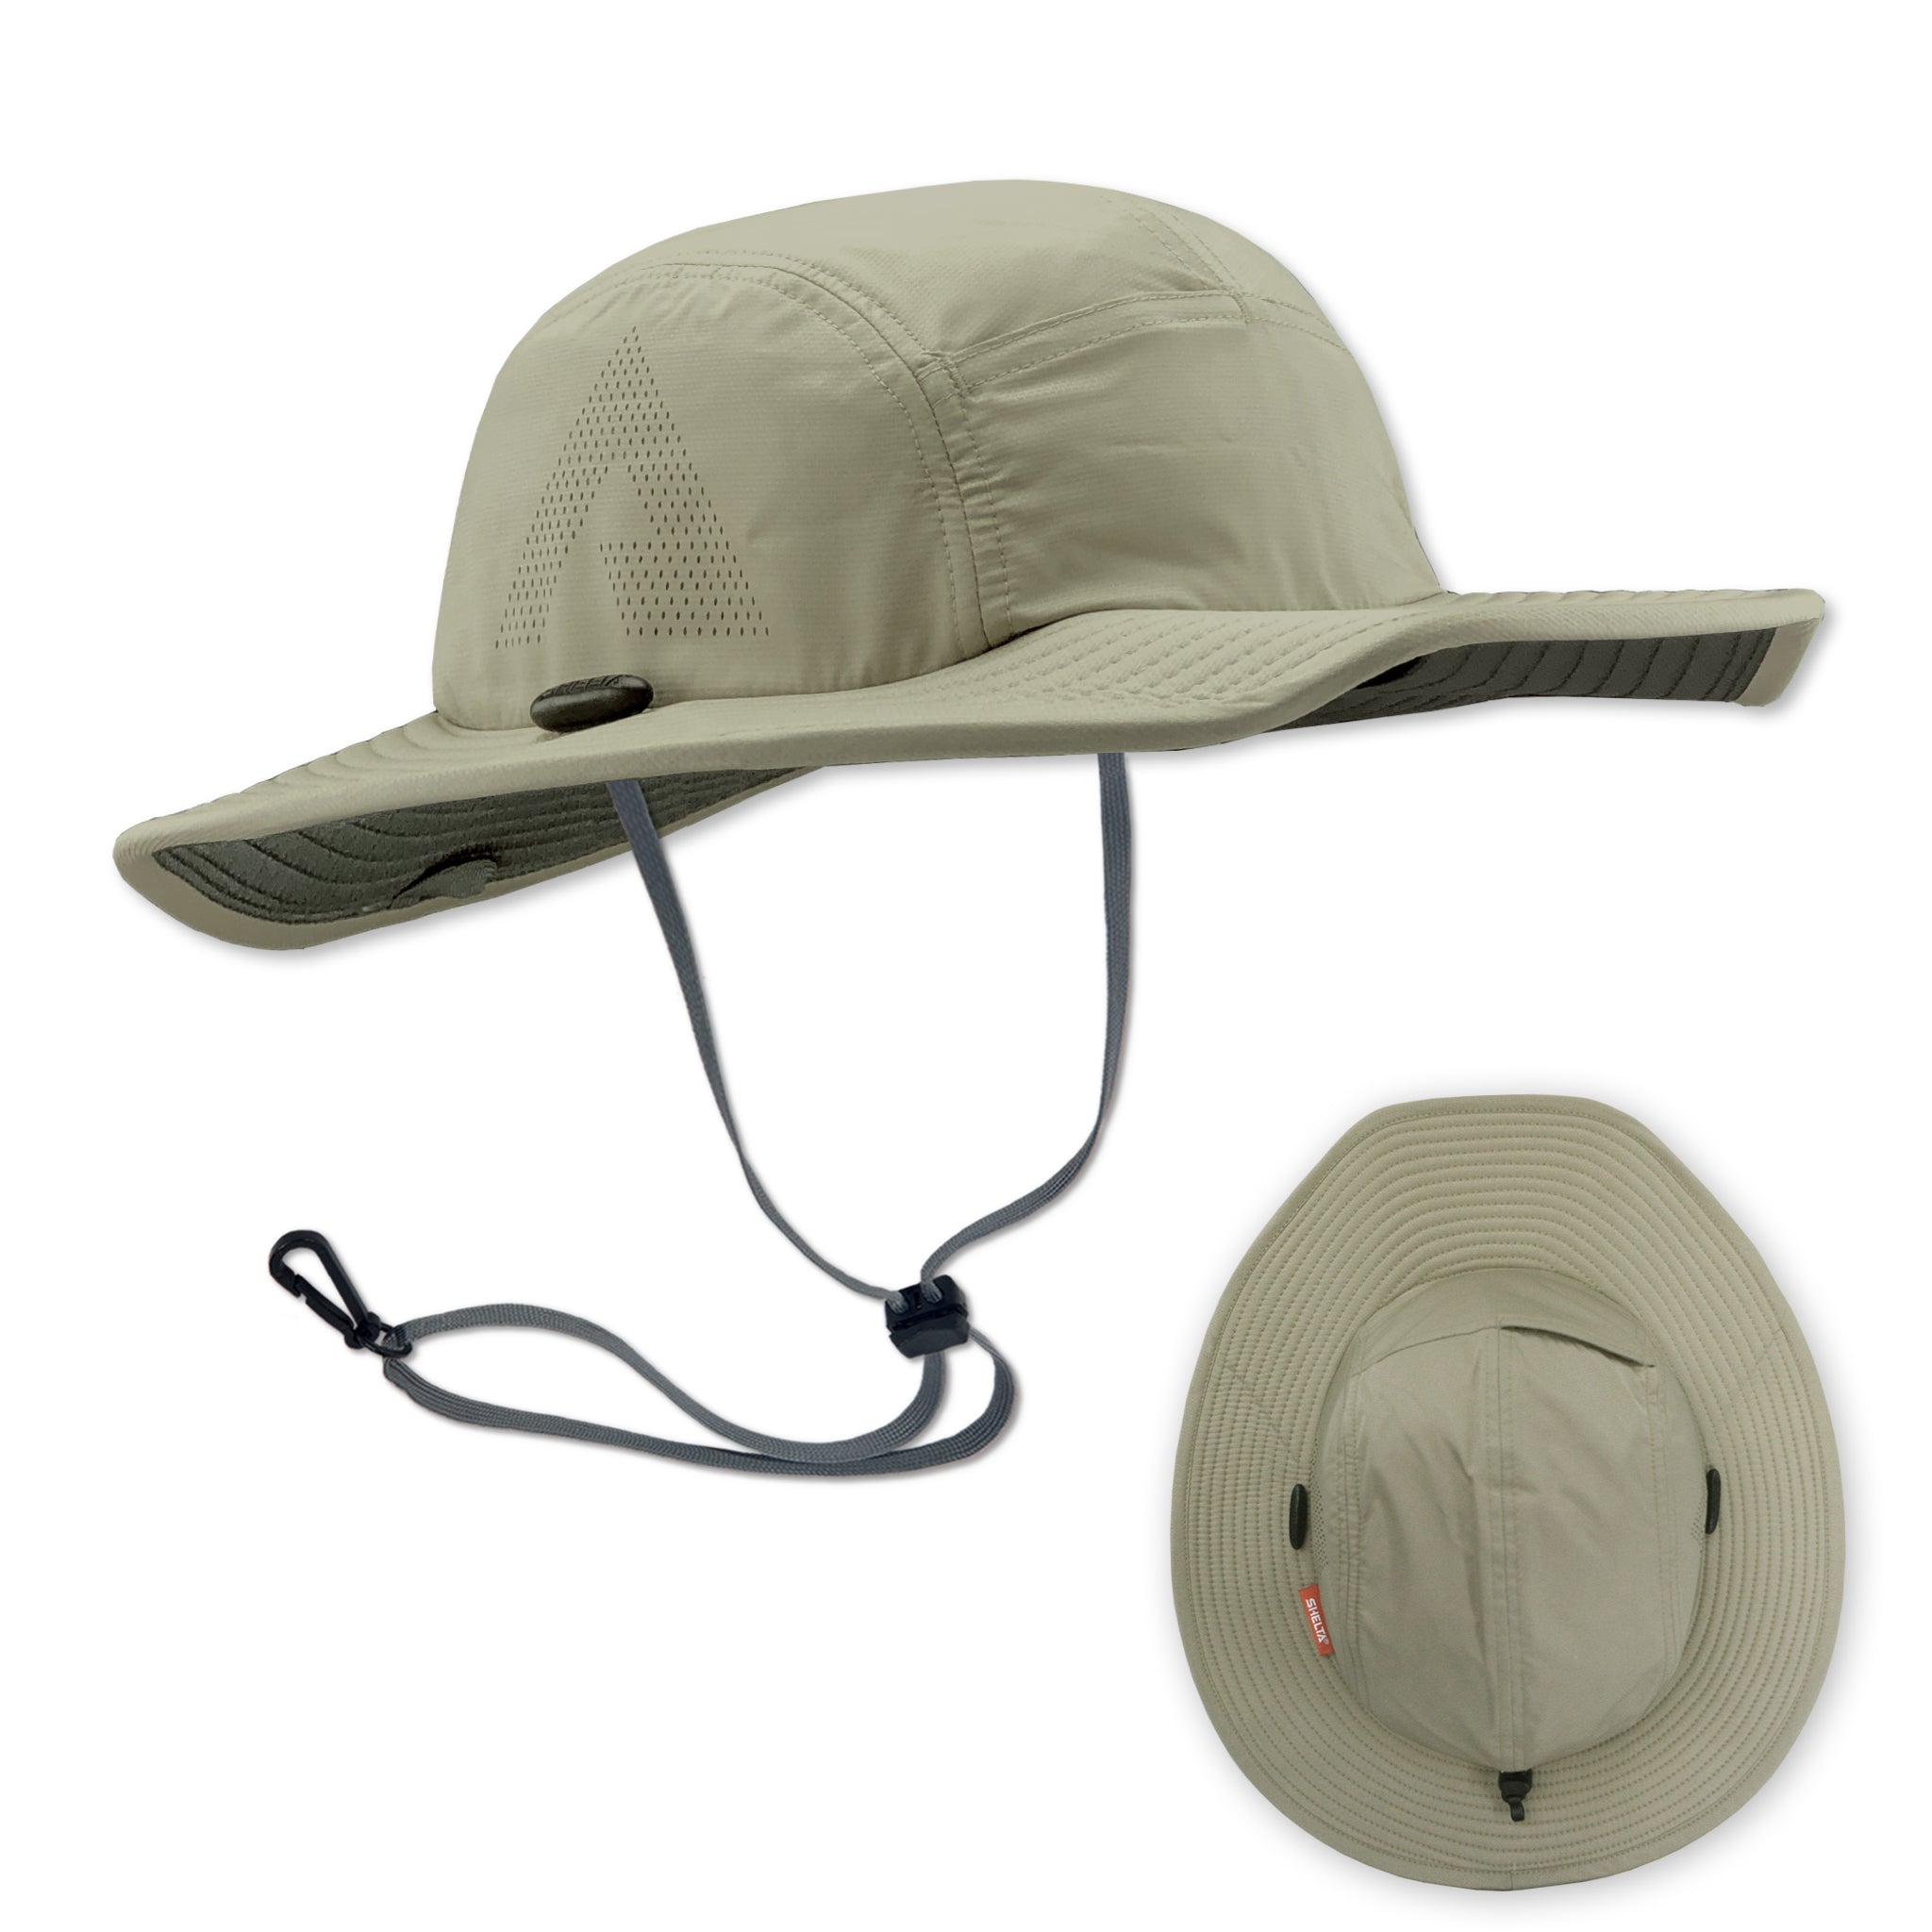 Thanks for the great review Man Makes Fire – SHELTA High Performance Sun  Hats